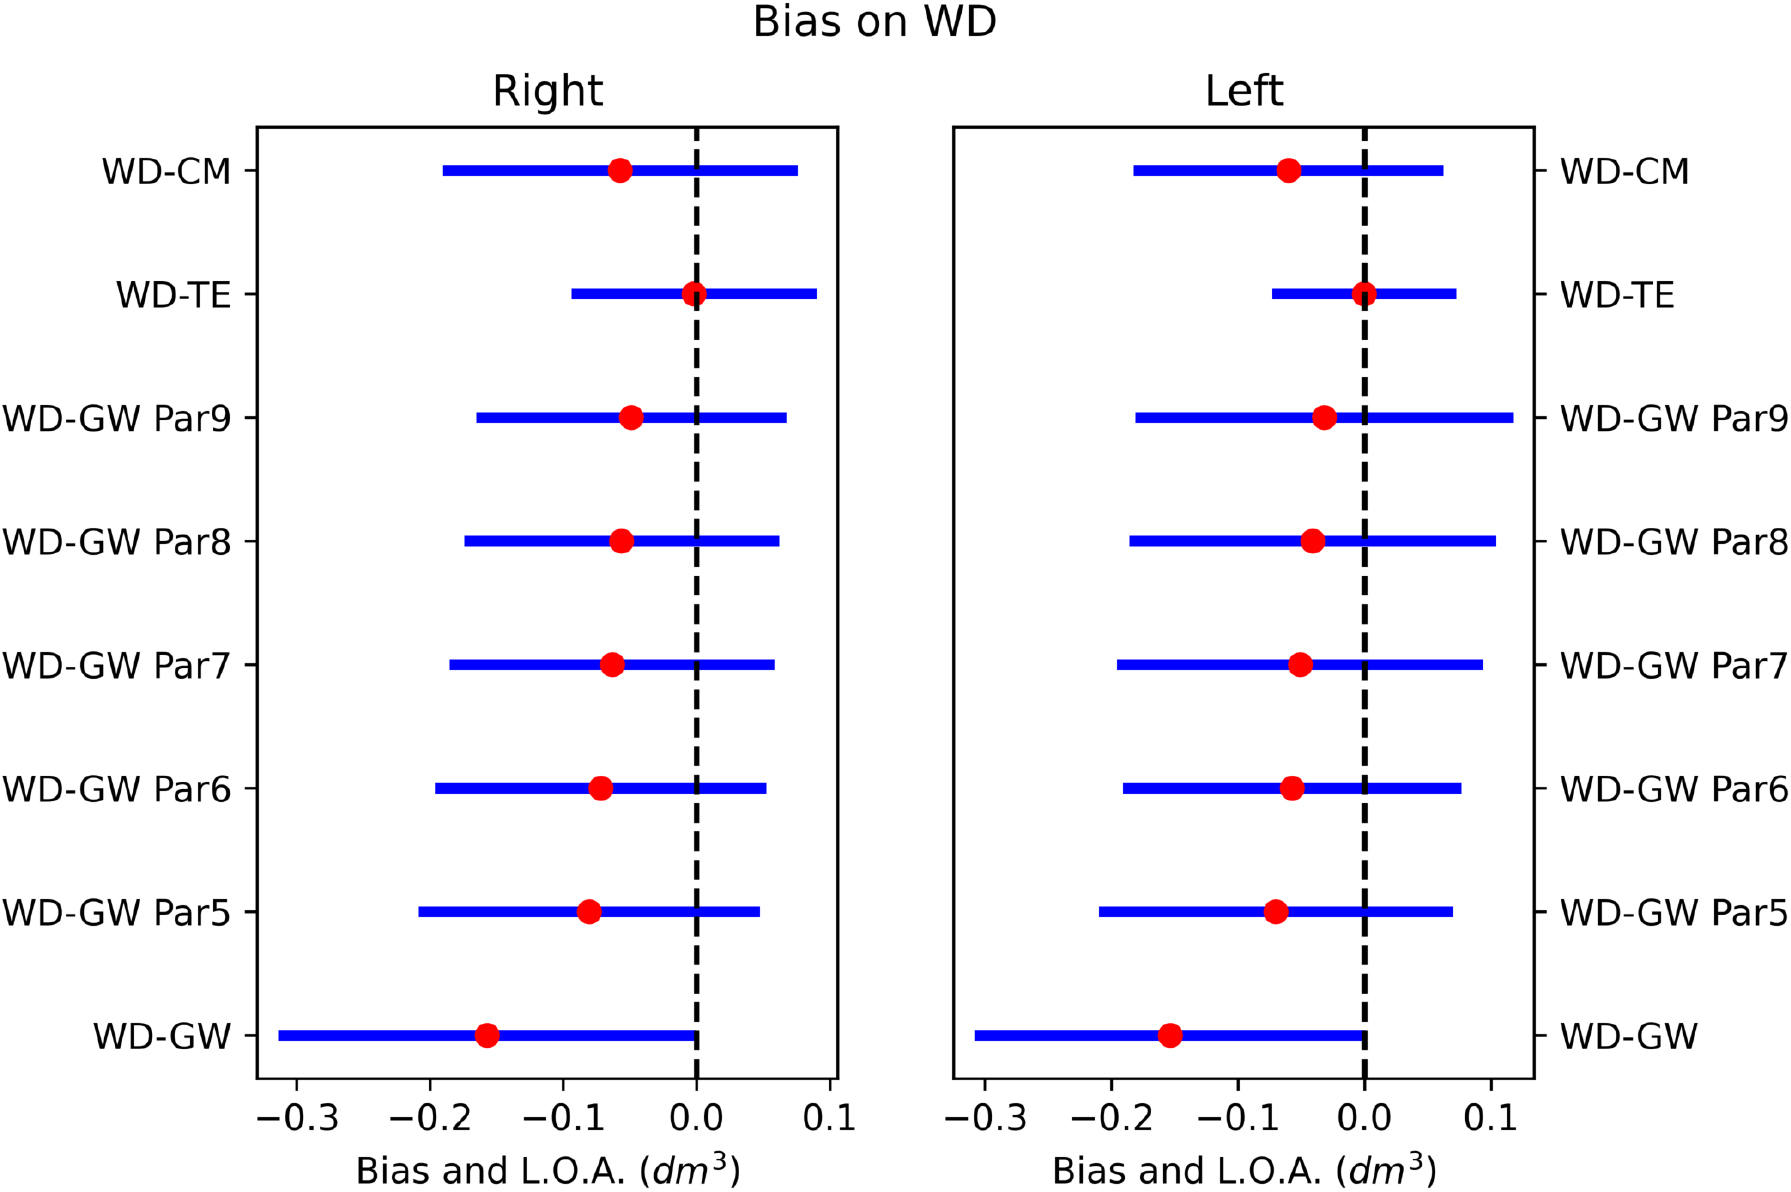 Bias between WD and other volumetrics on right and left hands. Red dot is the systematic difference, while the line extents represent the limits of agreement (L.O.A.).